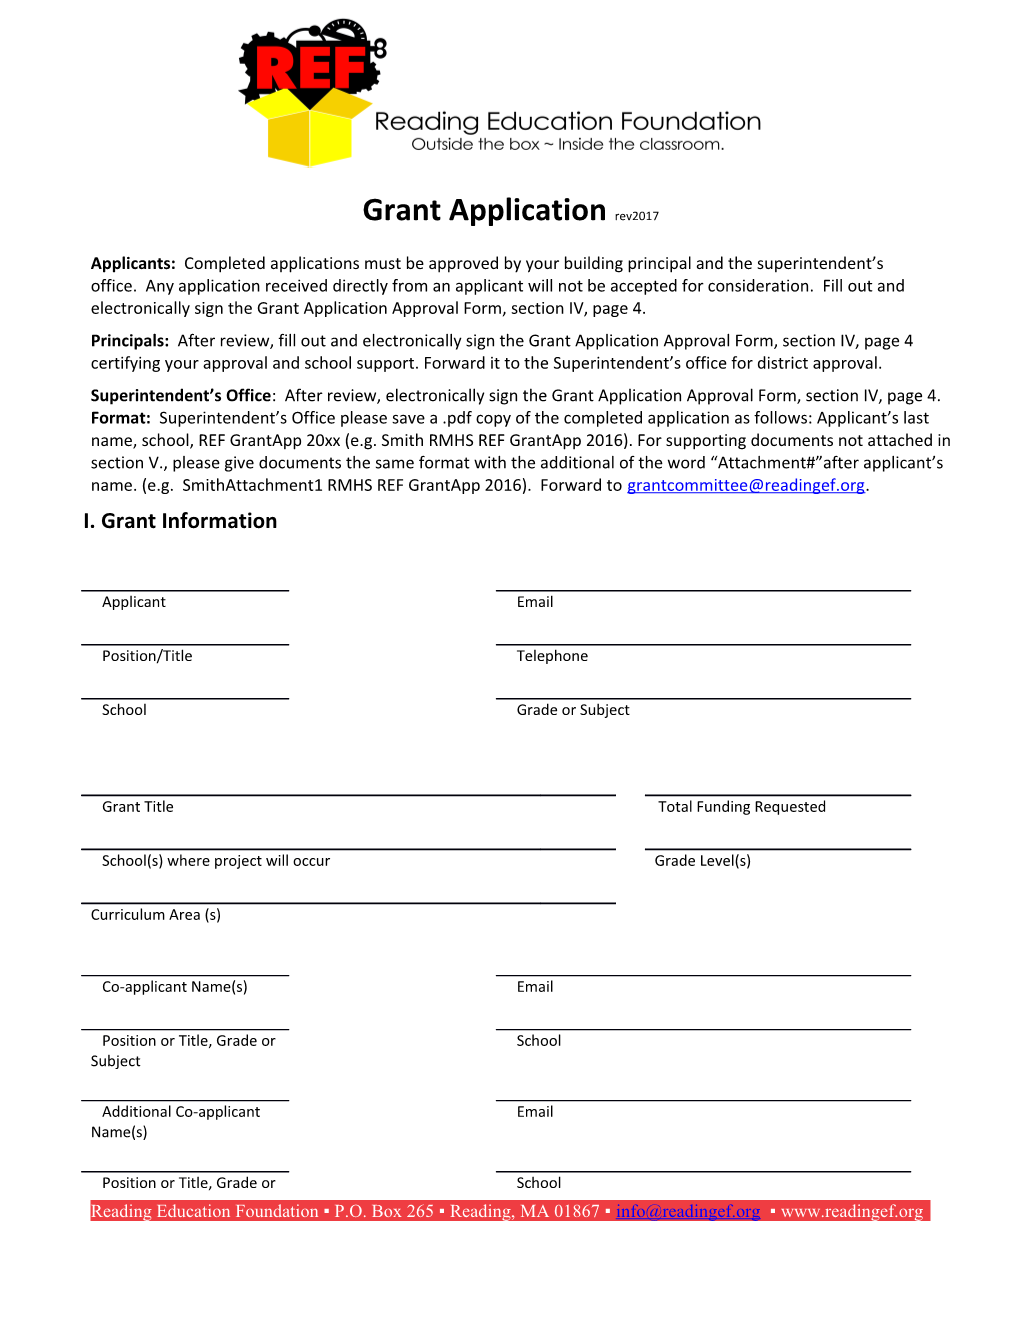 REF Grant Application Page 1